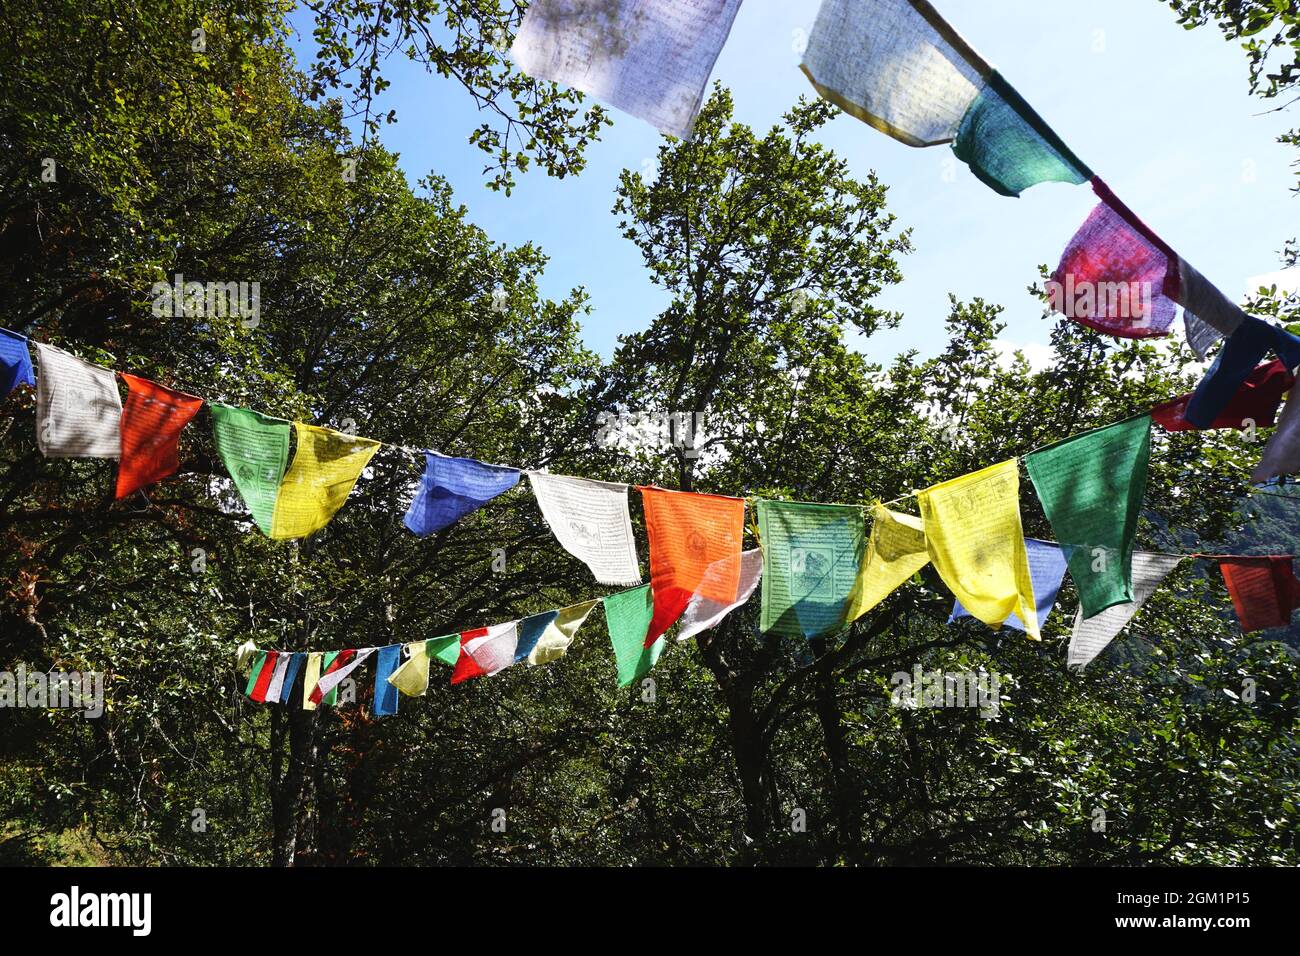 Strings of colorful prayer flags hang among the trees above a forested trail in rural Bhutan. Legends trace the origin of the prayer flag to Buddha. Stock Photo